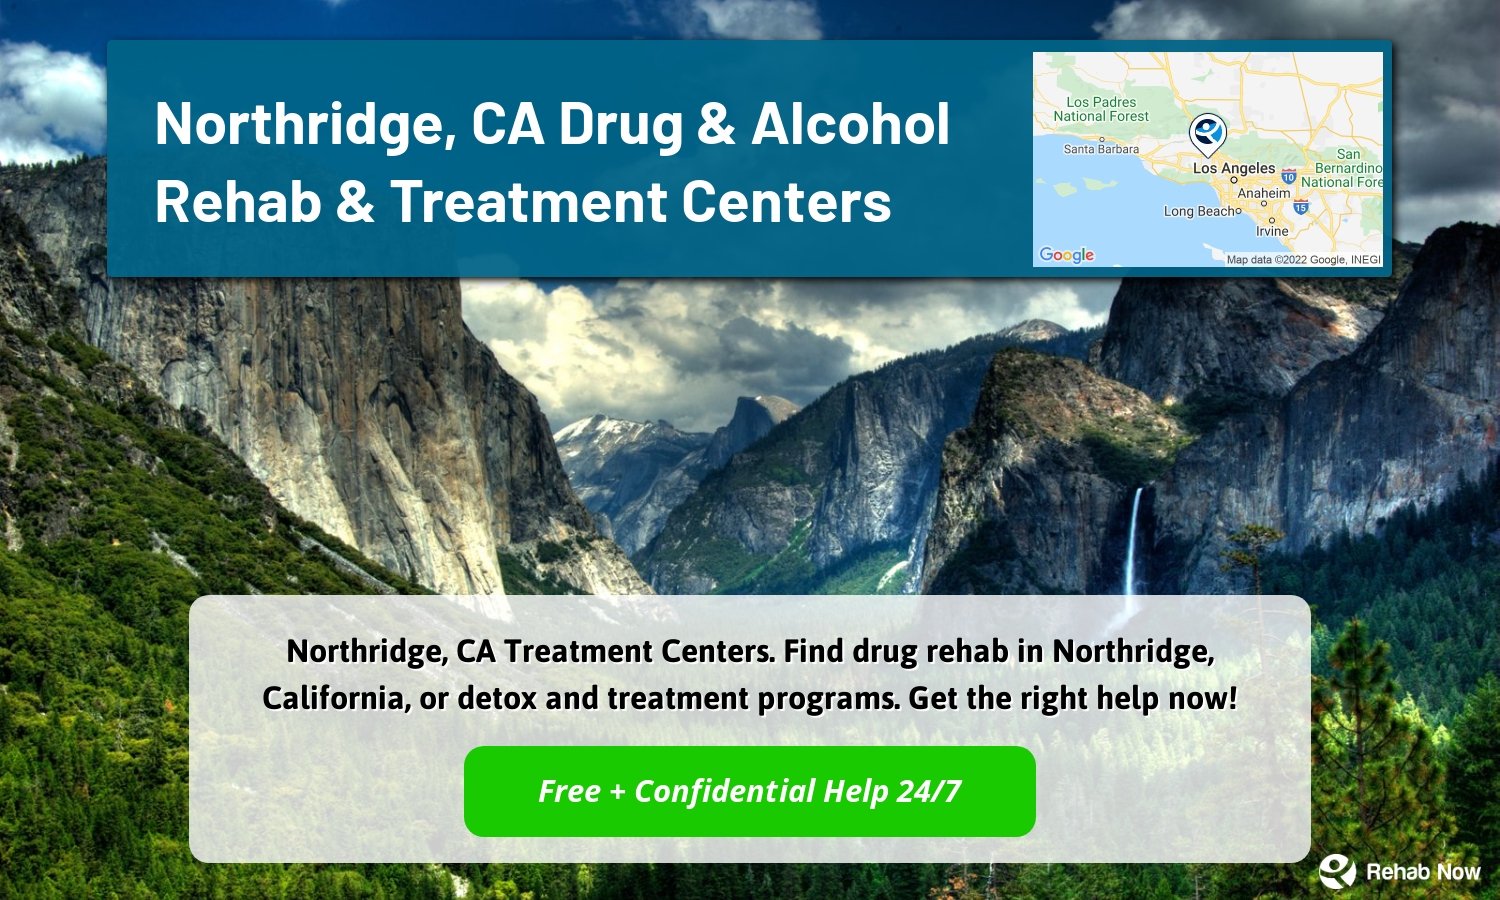 Northridge, CA Treatment Centers. Find drug rehab in Northridge, California, or detox and treatment programs. Get the right help now!